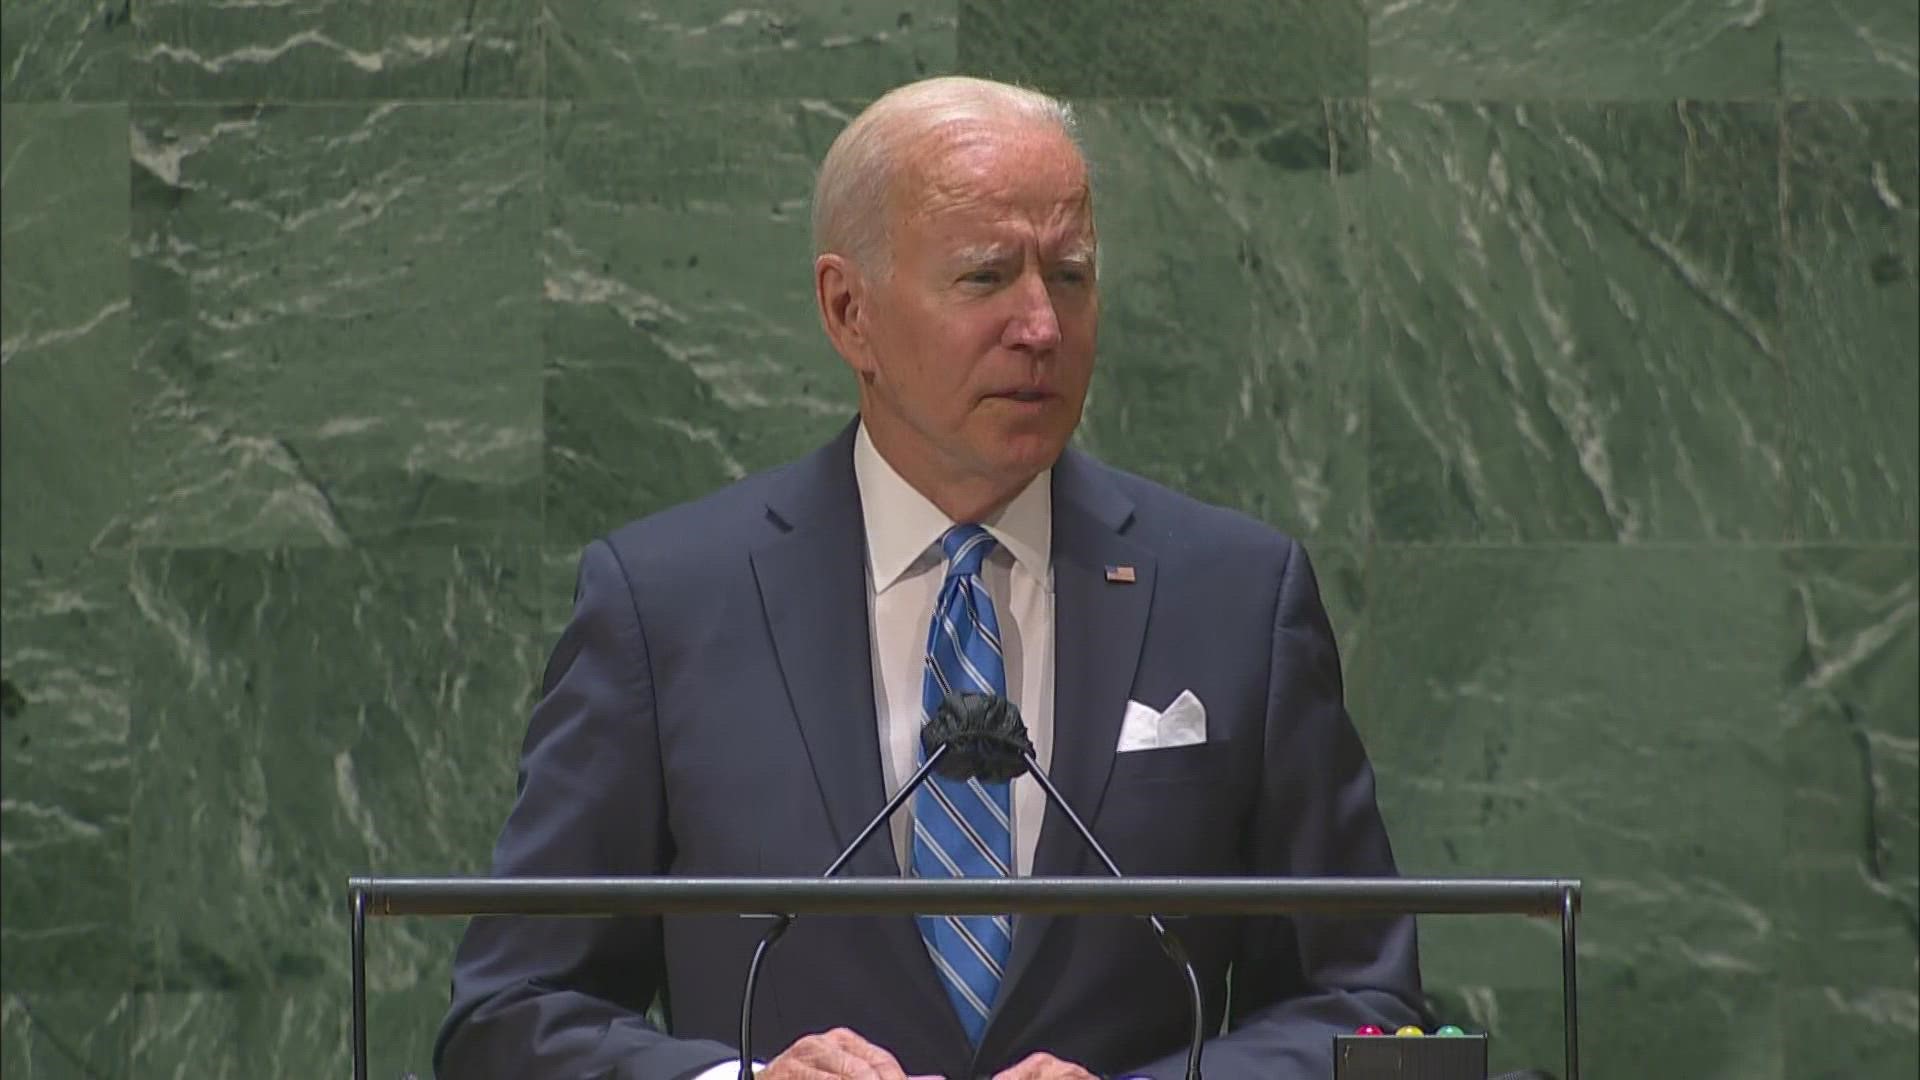 President Joe Biden delivers remarks before the 76th session of the United Nations General Assembly.